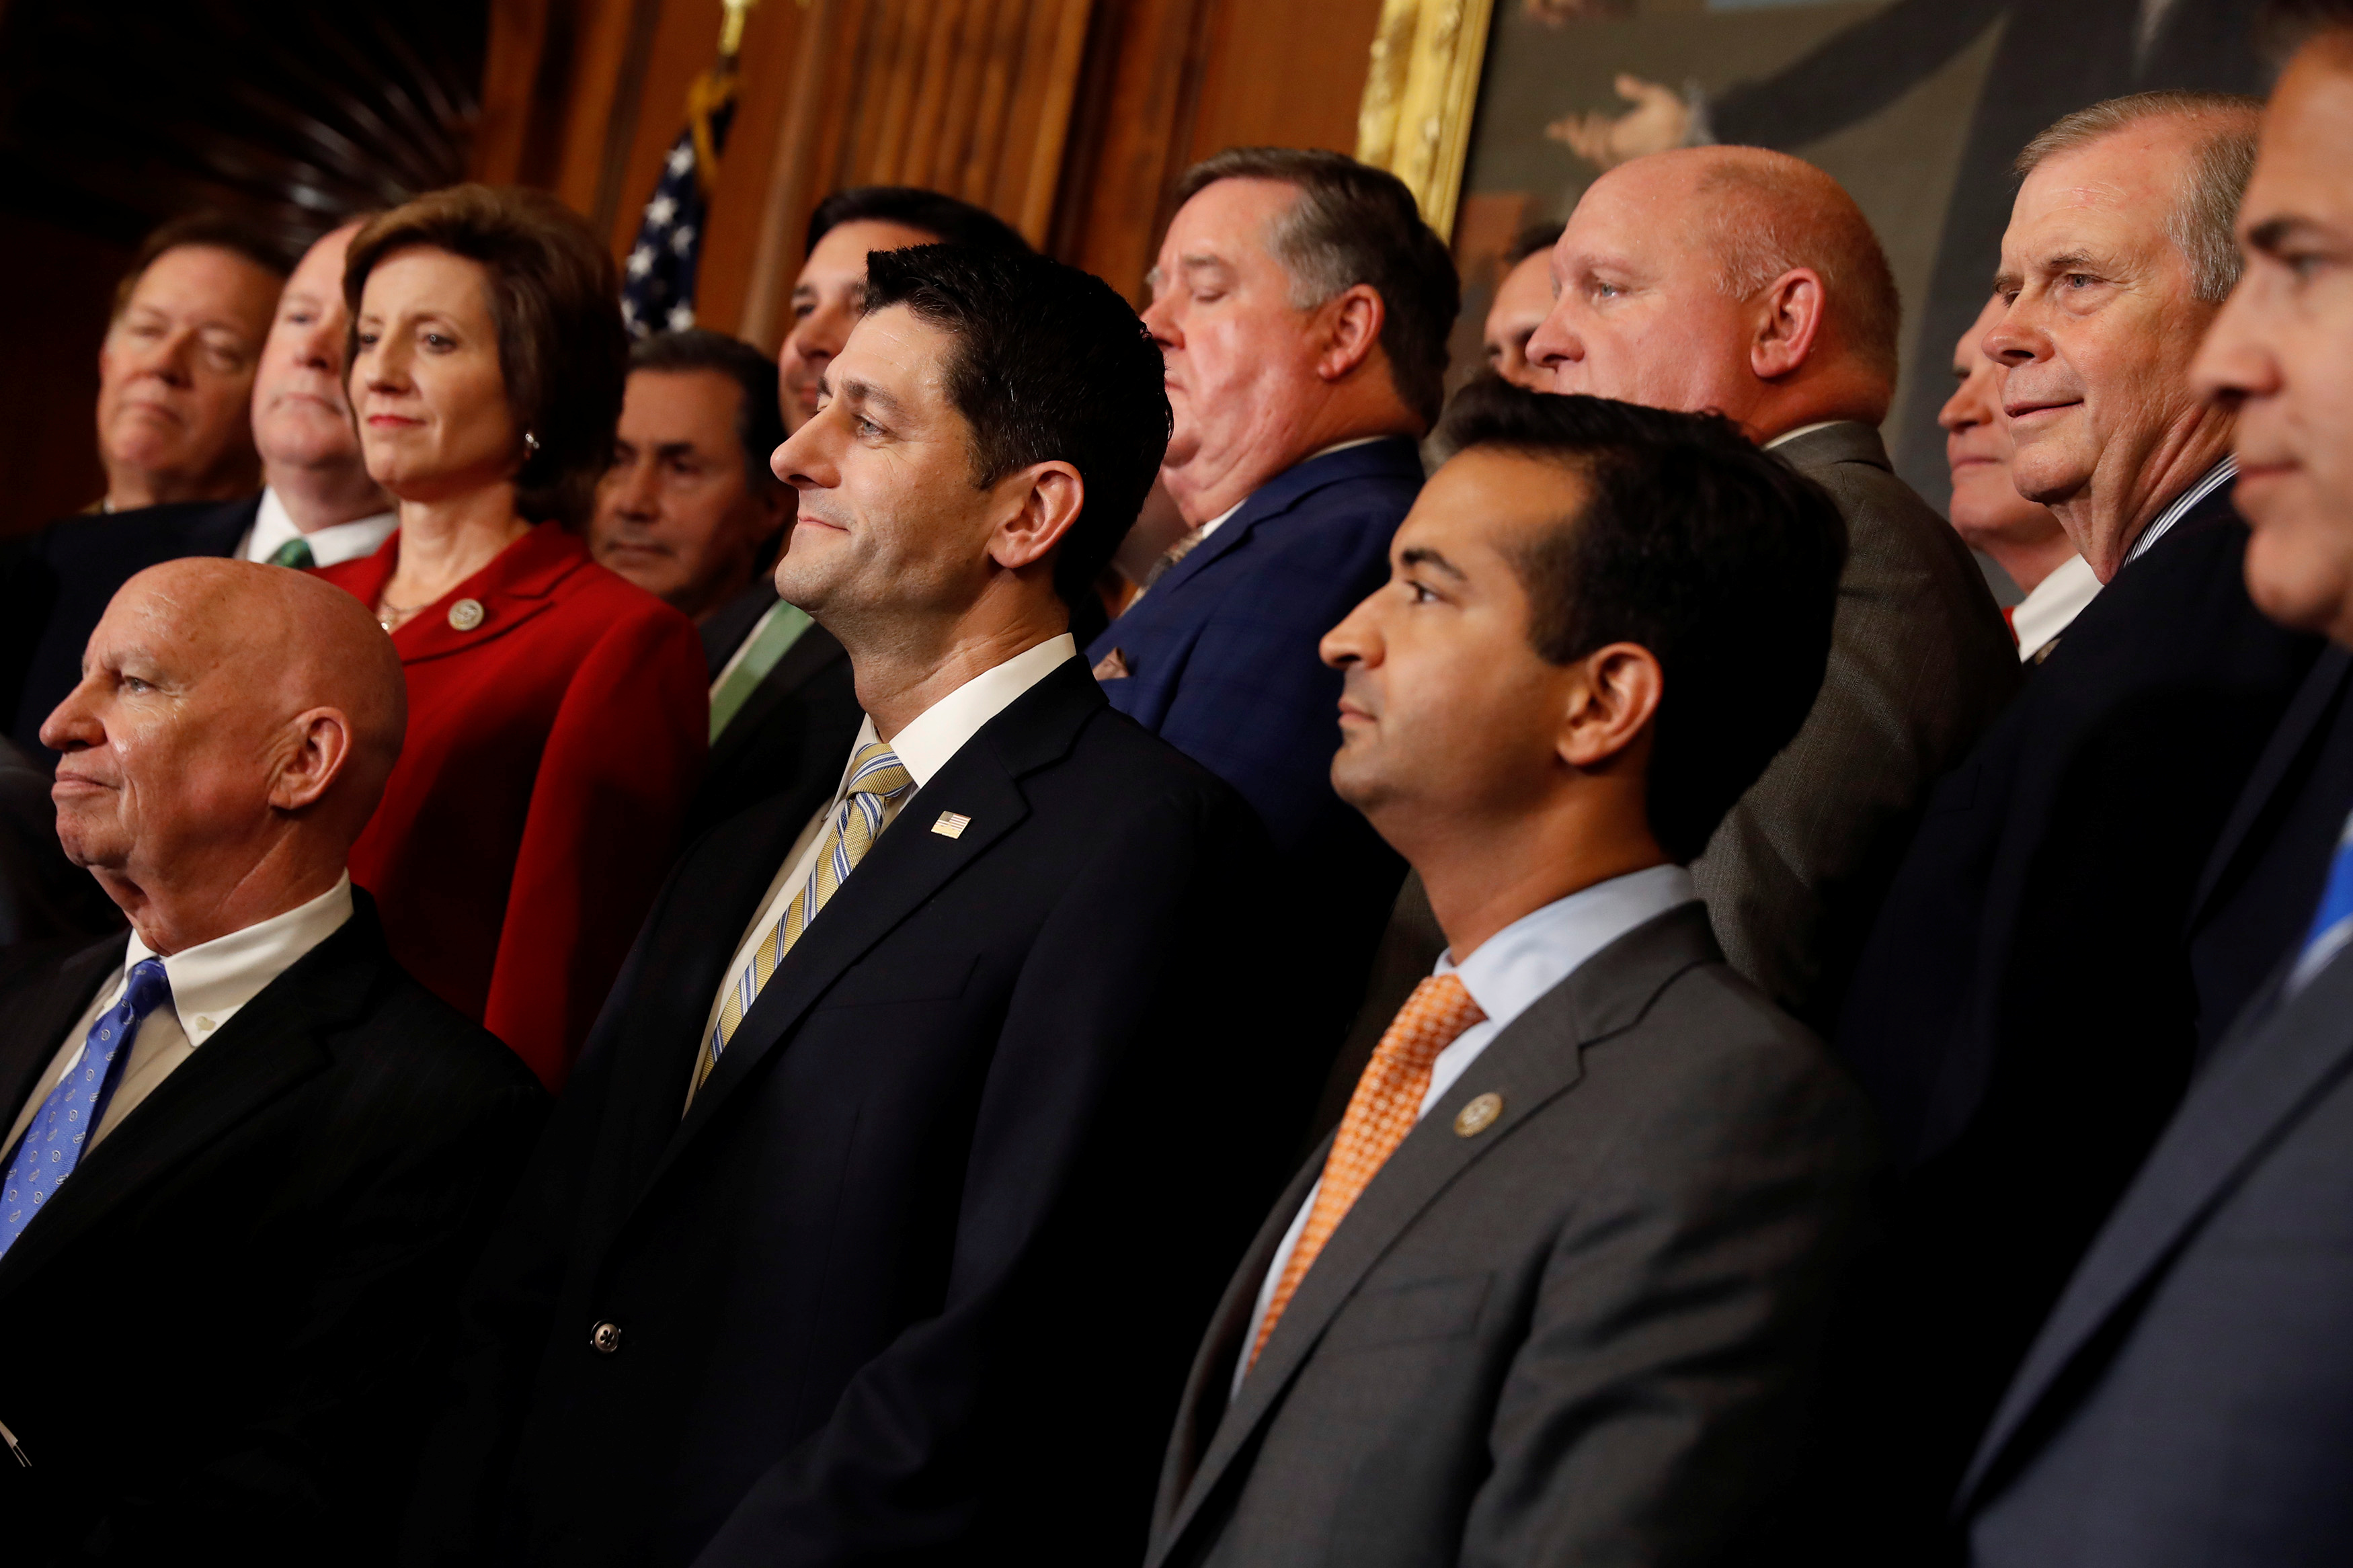 Rep. Kevin Brady (R-TX), Speaker of the House Paul Ryan and Rep. Carlos Curbelo (R-FL) look on during a news conference announcing the passage of the "Tax Cuts and Jobs Act" at the U.S. Capitol in Washington